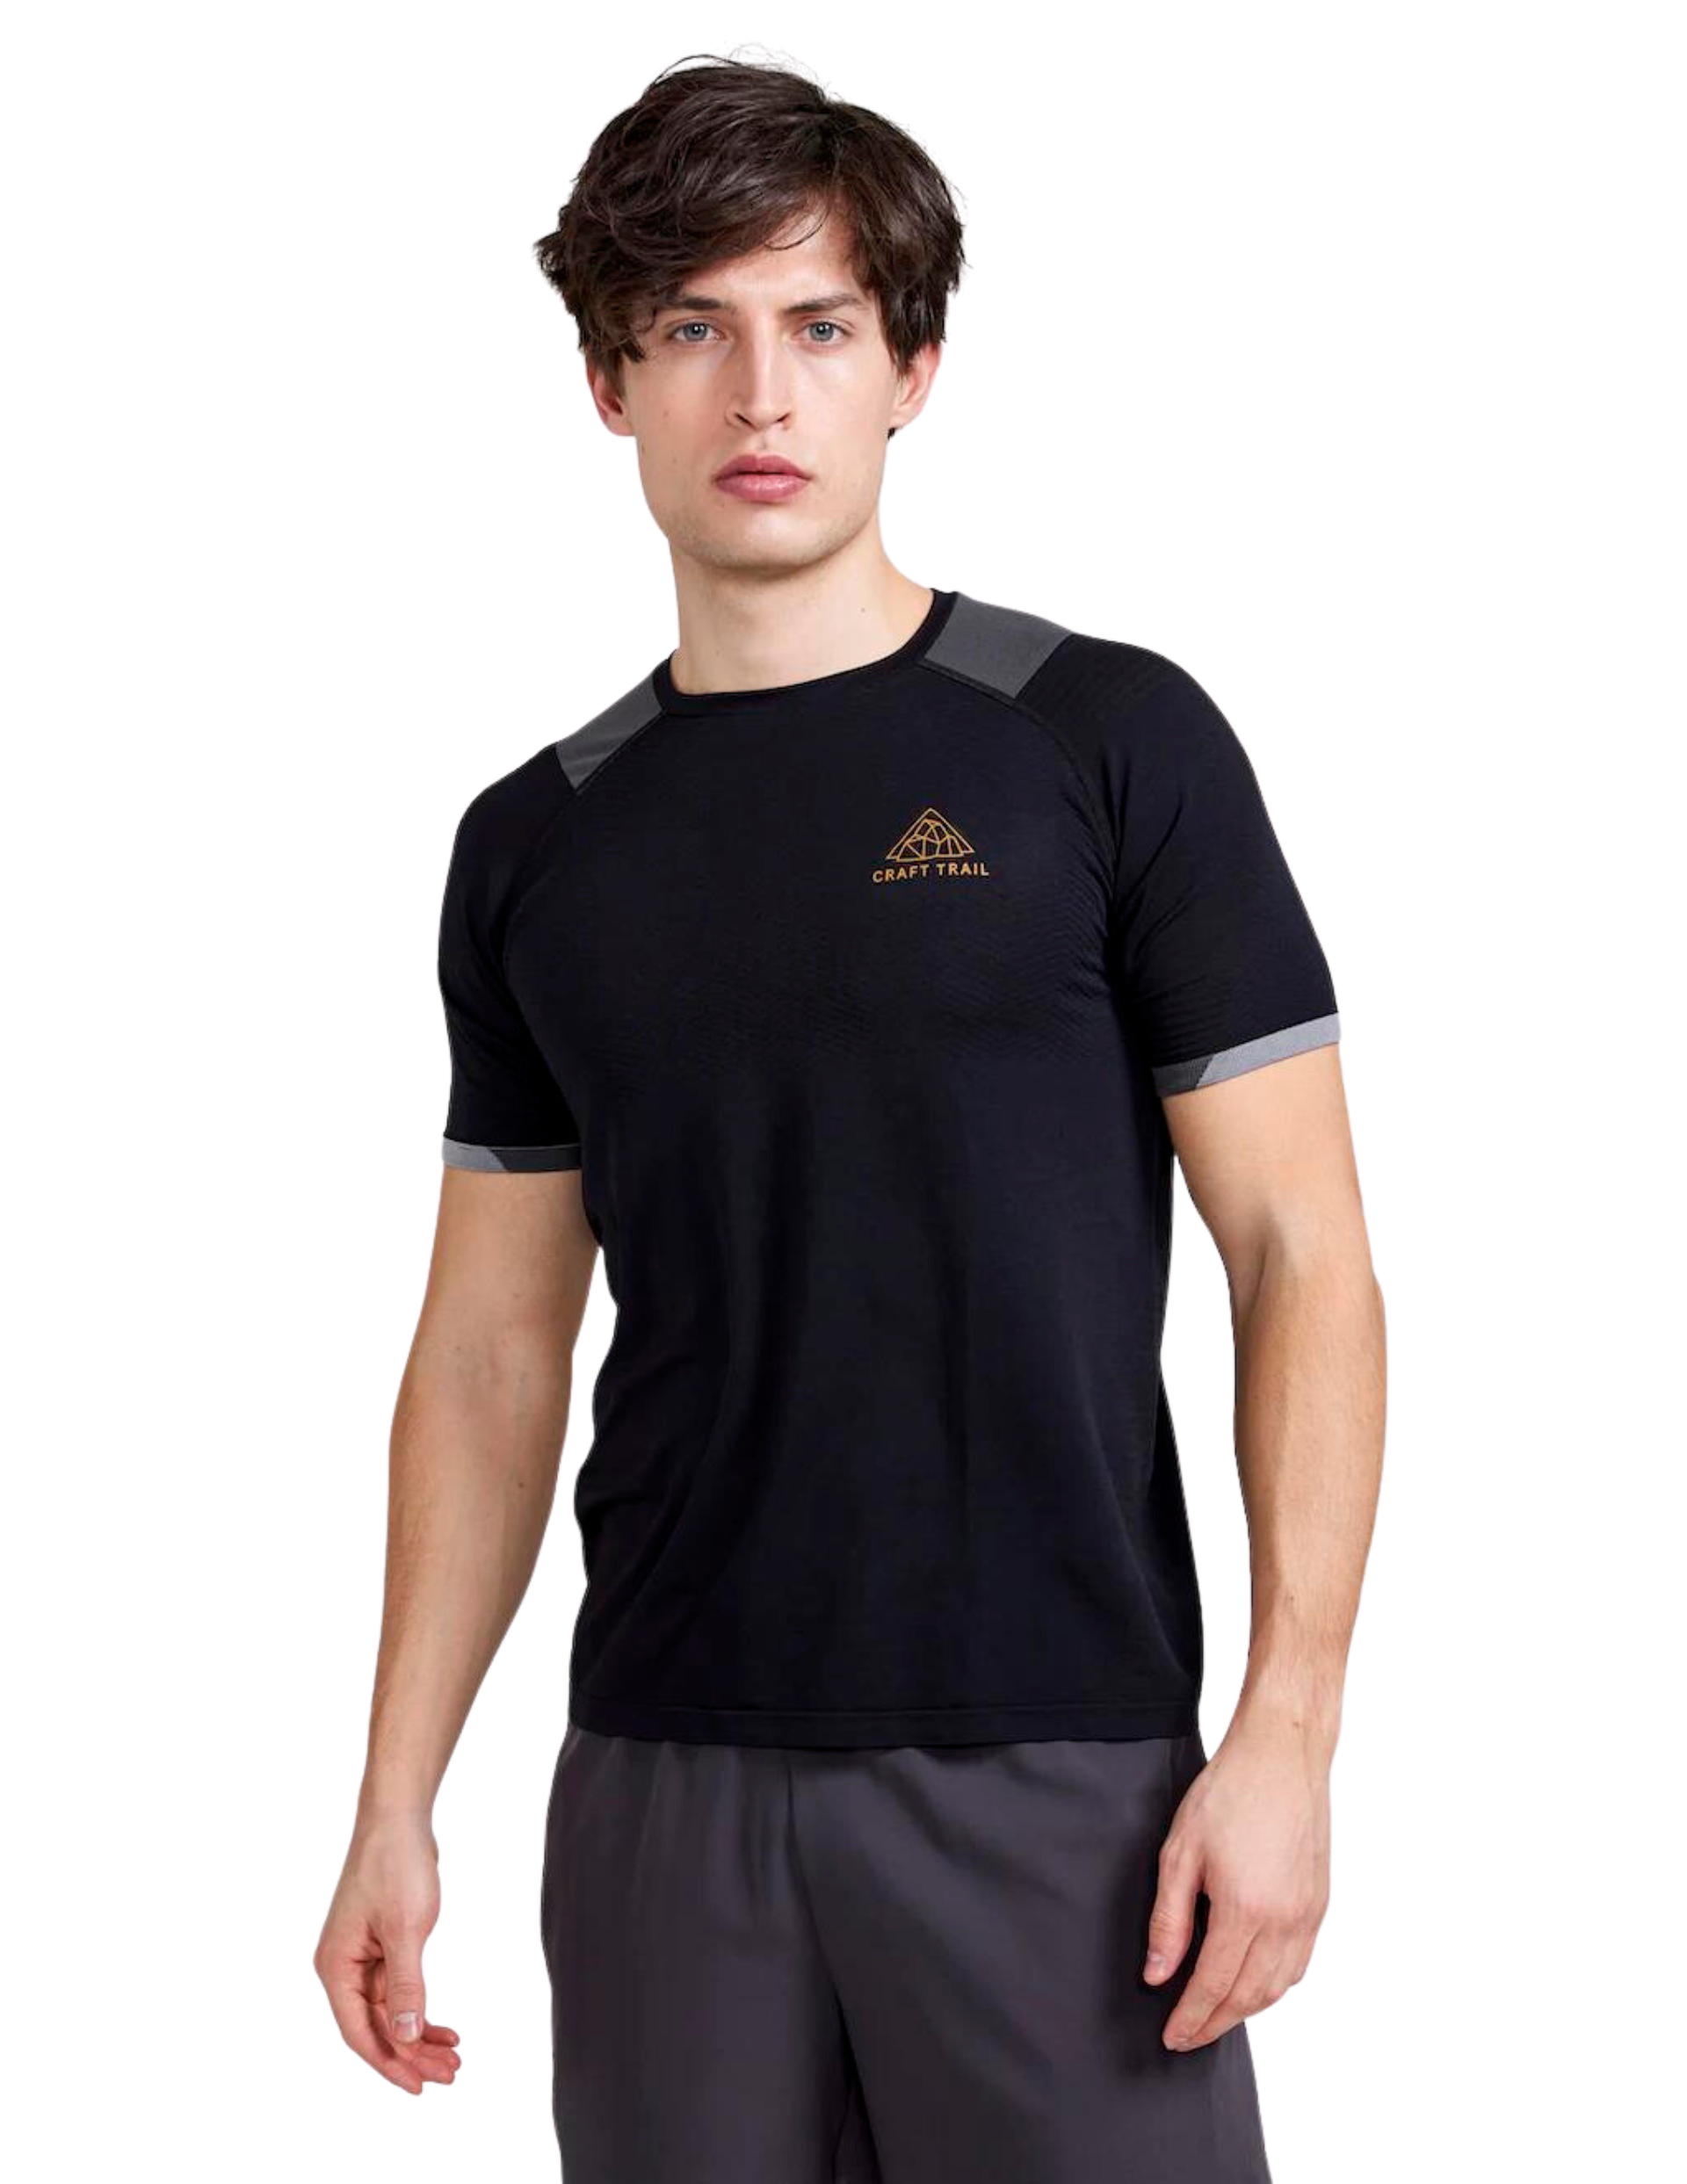 T-Shirt de Running Craft Pro Trail Fuseknit Manches Courtes Homme